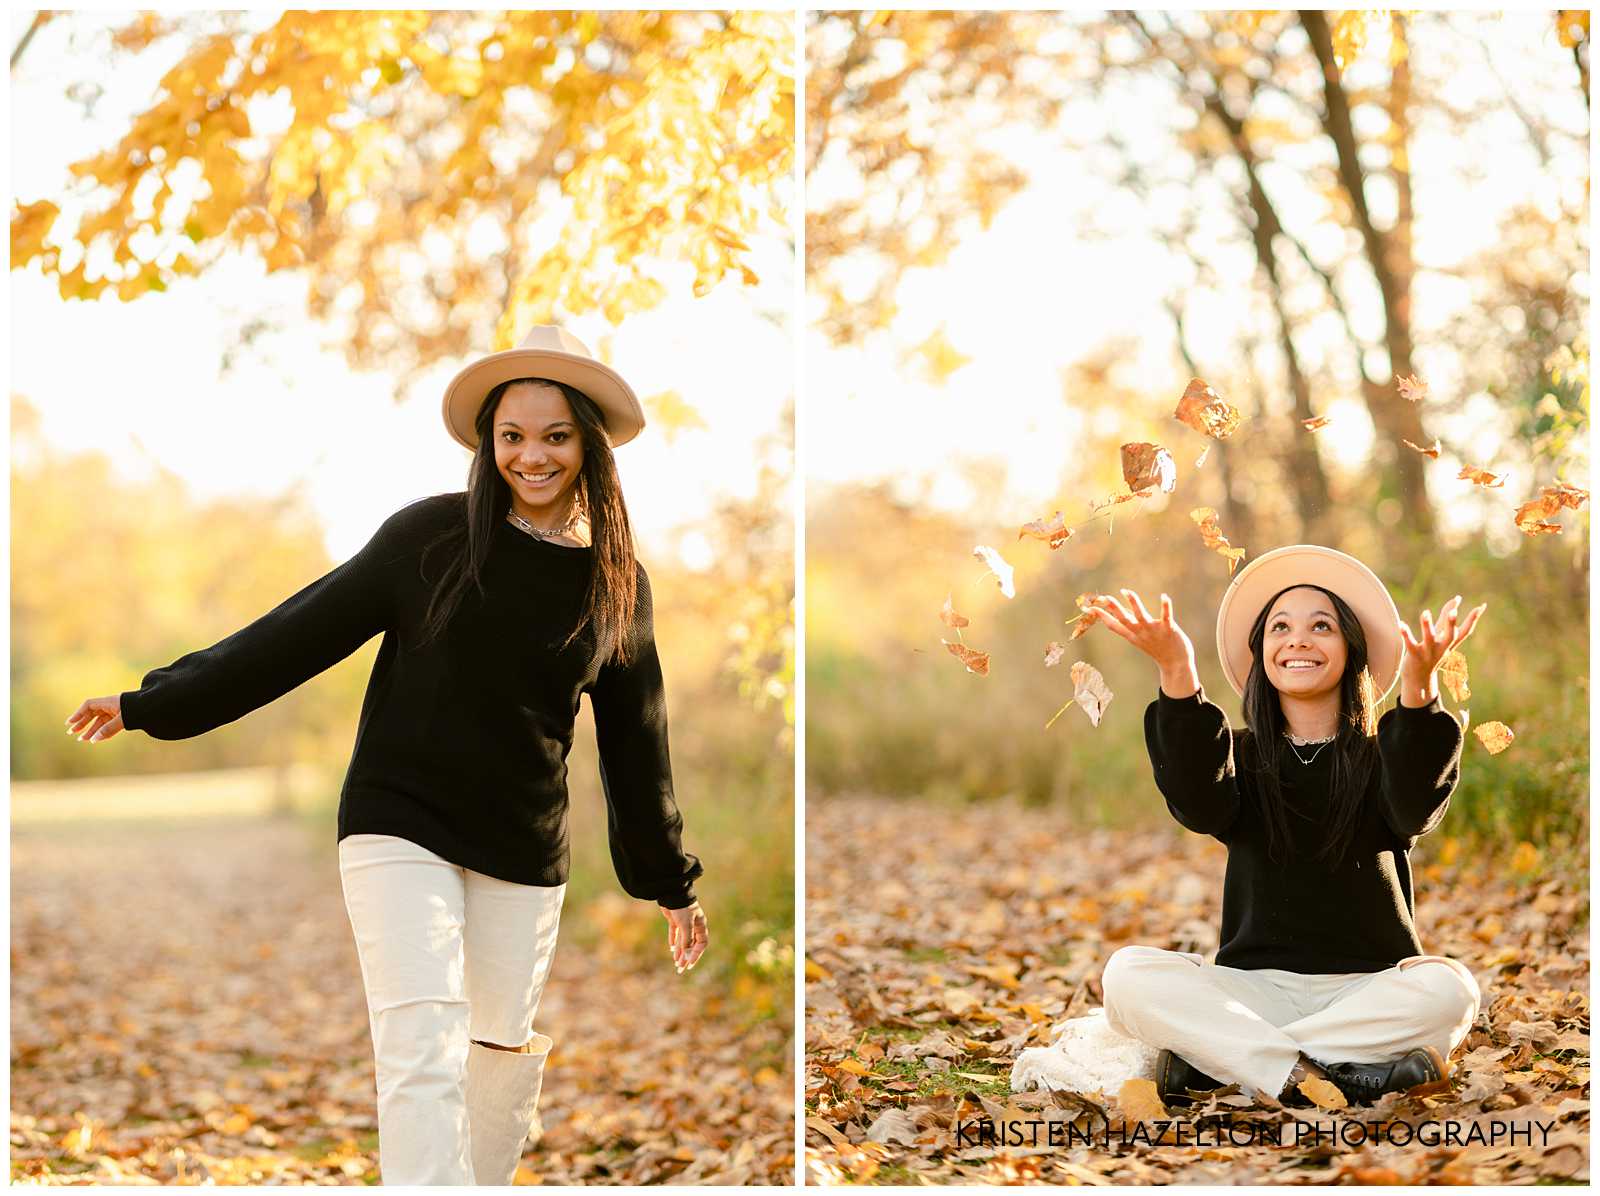 High school senior girl portraits throwing leaves in the fall